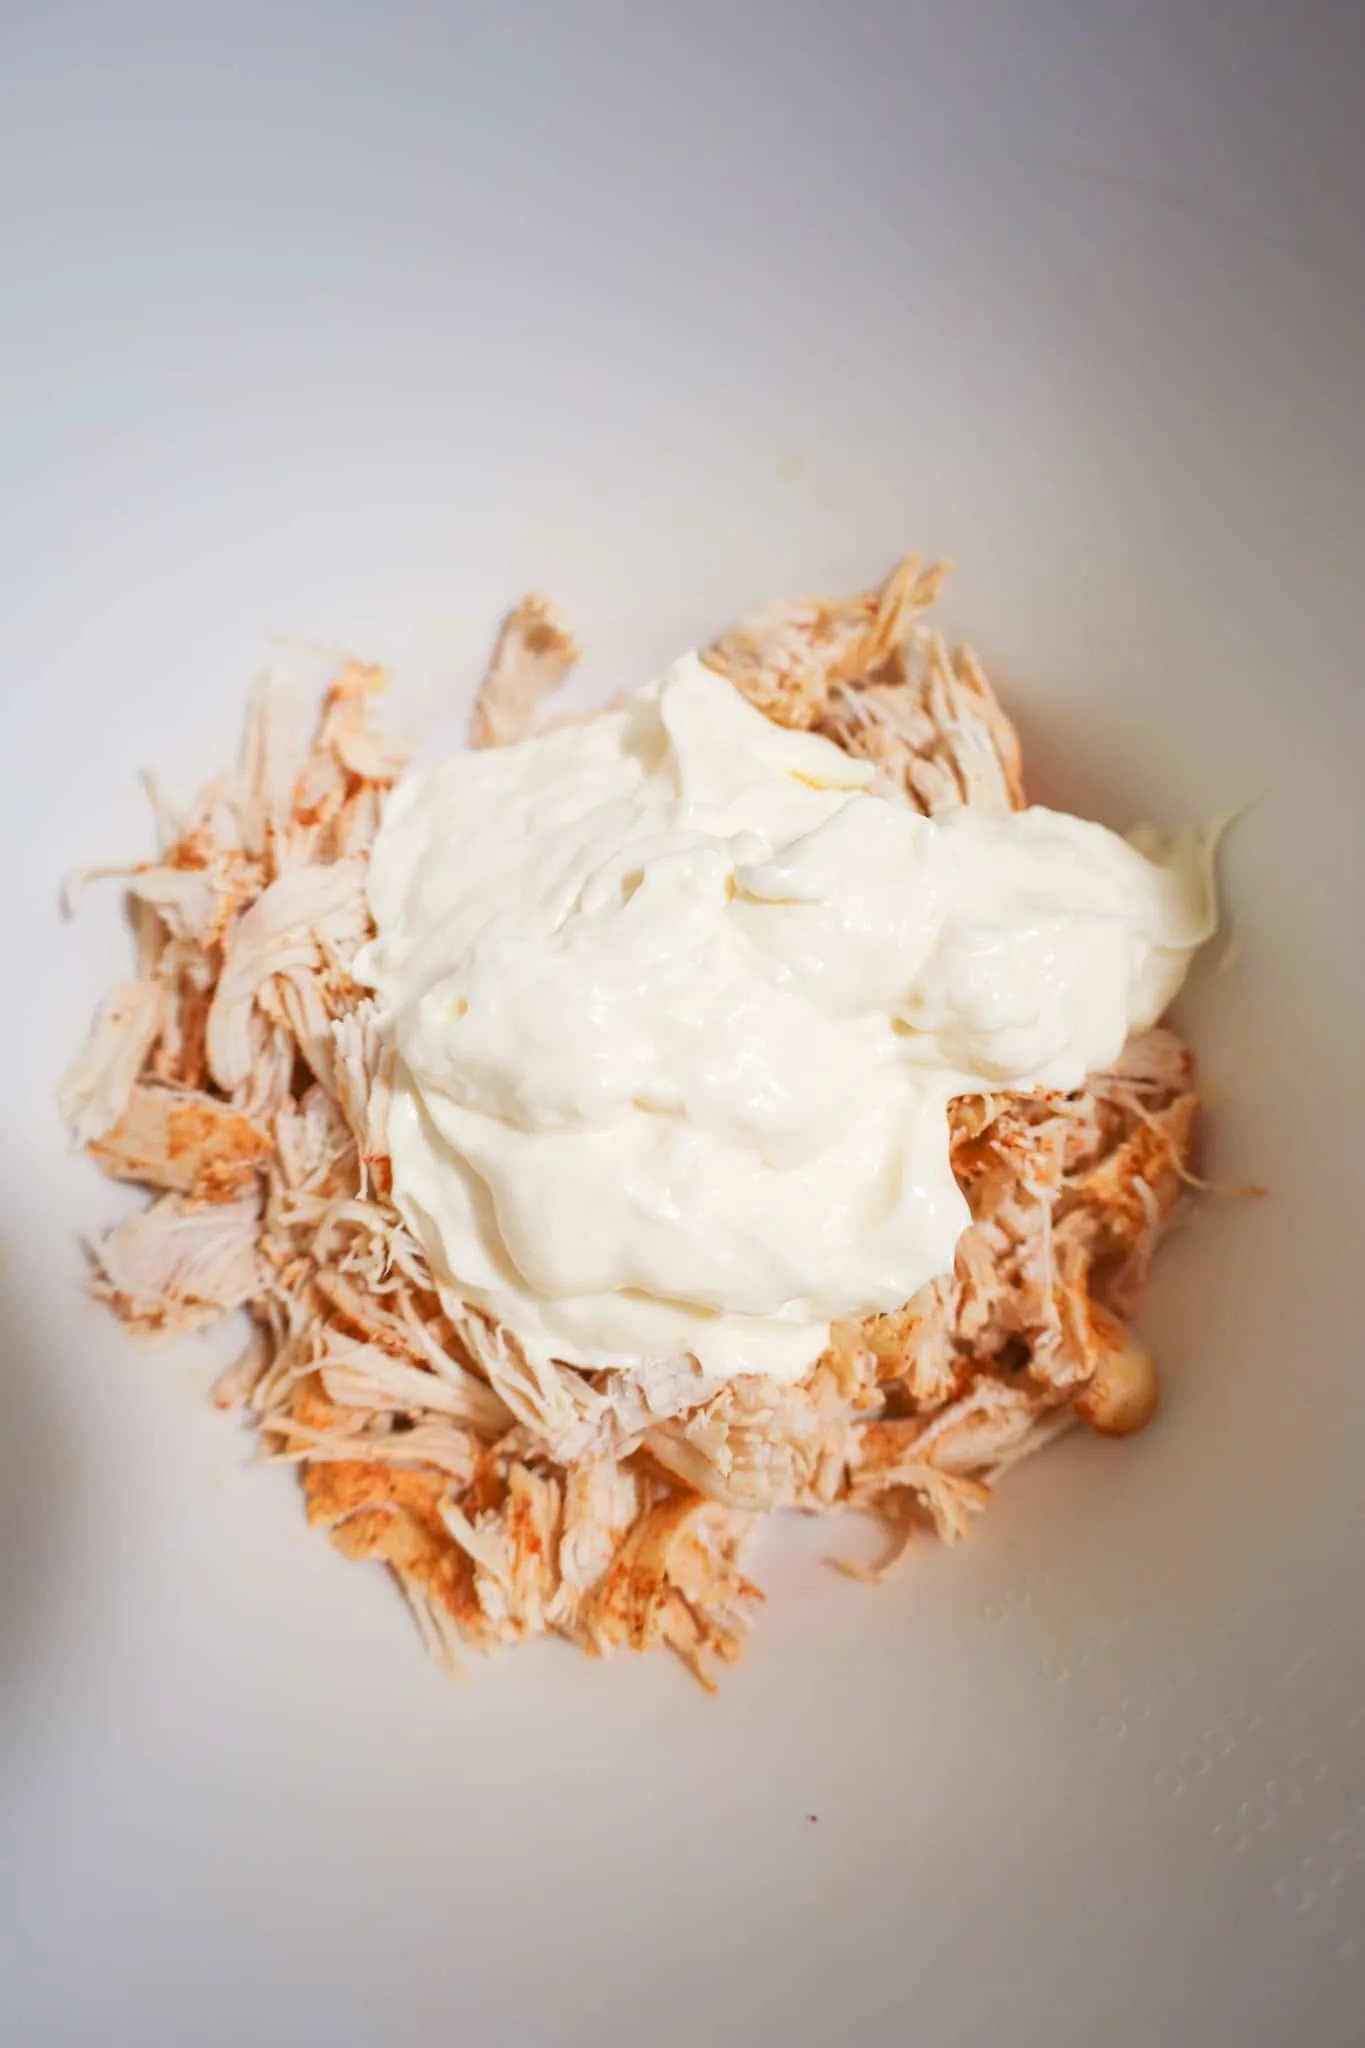 mayo on top of shredded chicken in a mixing bowl